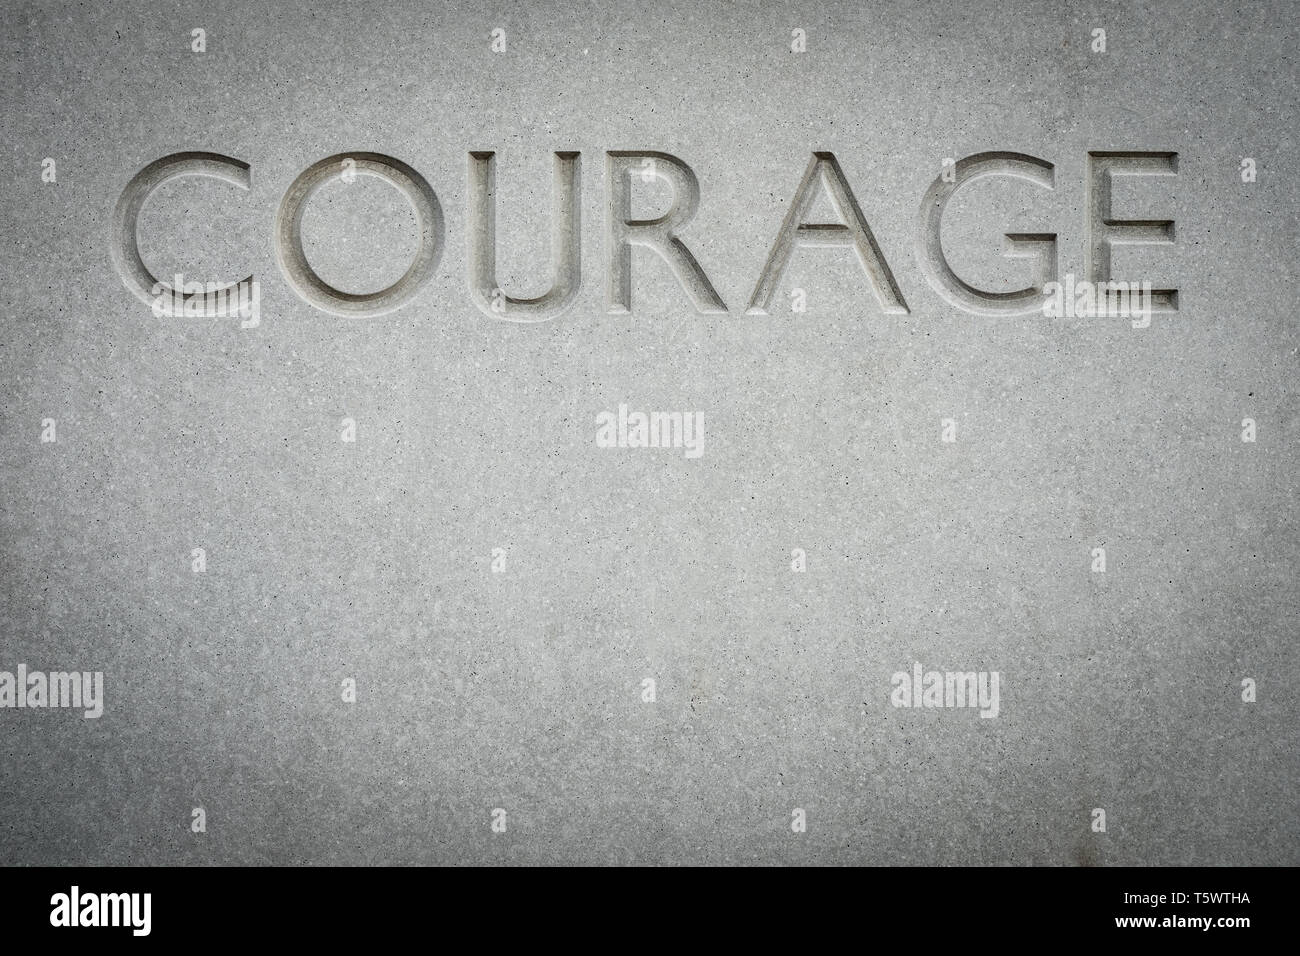 Conceptual Image Of The Word Courage Engraved Into Rock With Copy Space Stock Photo